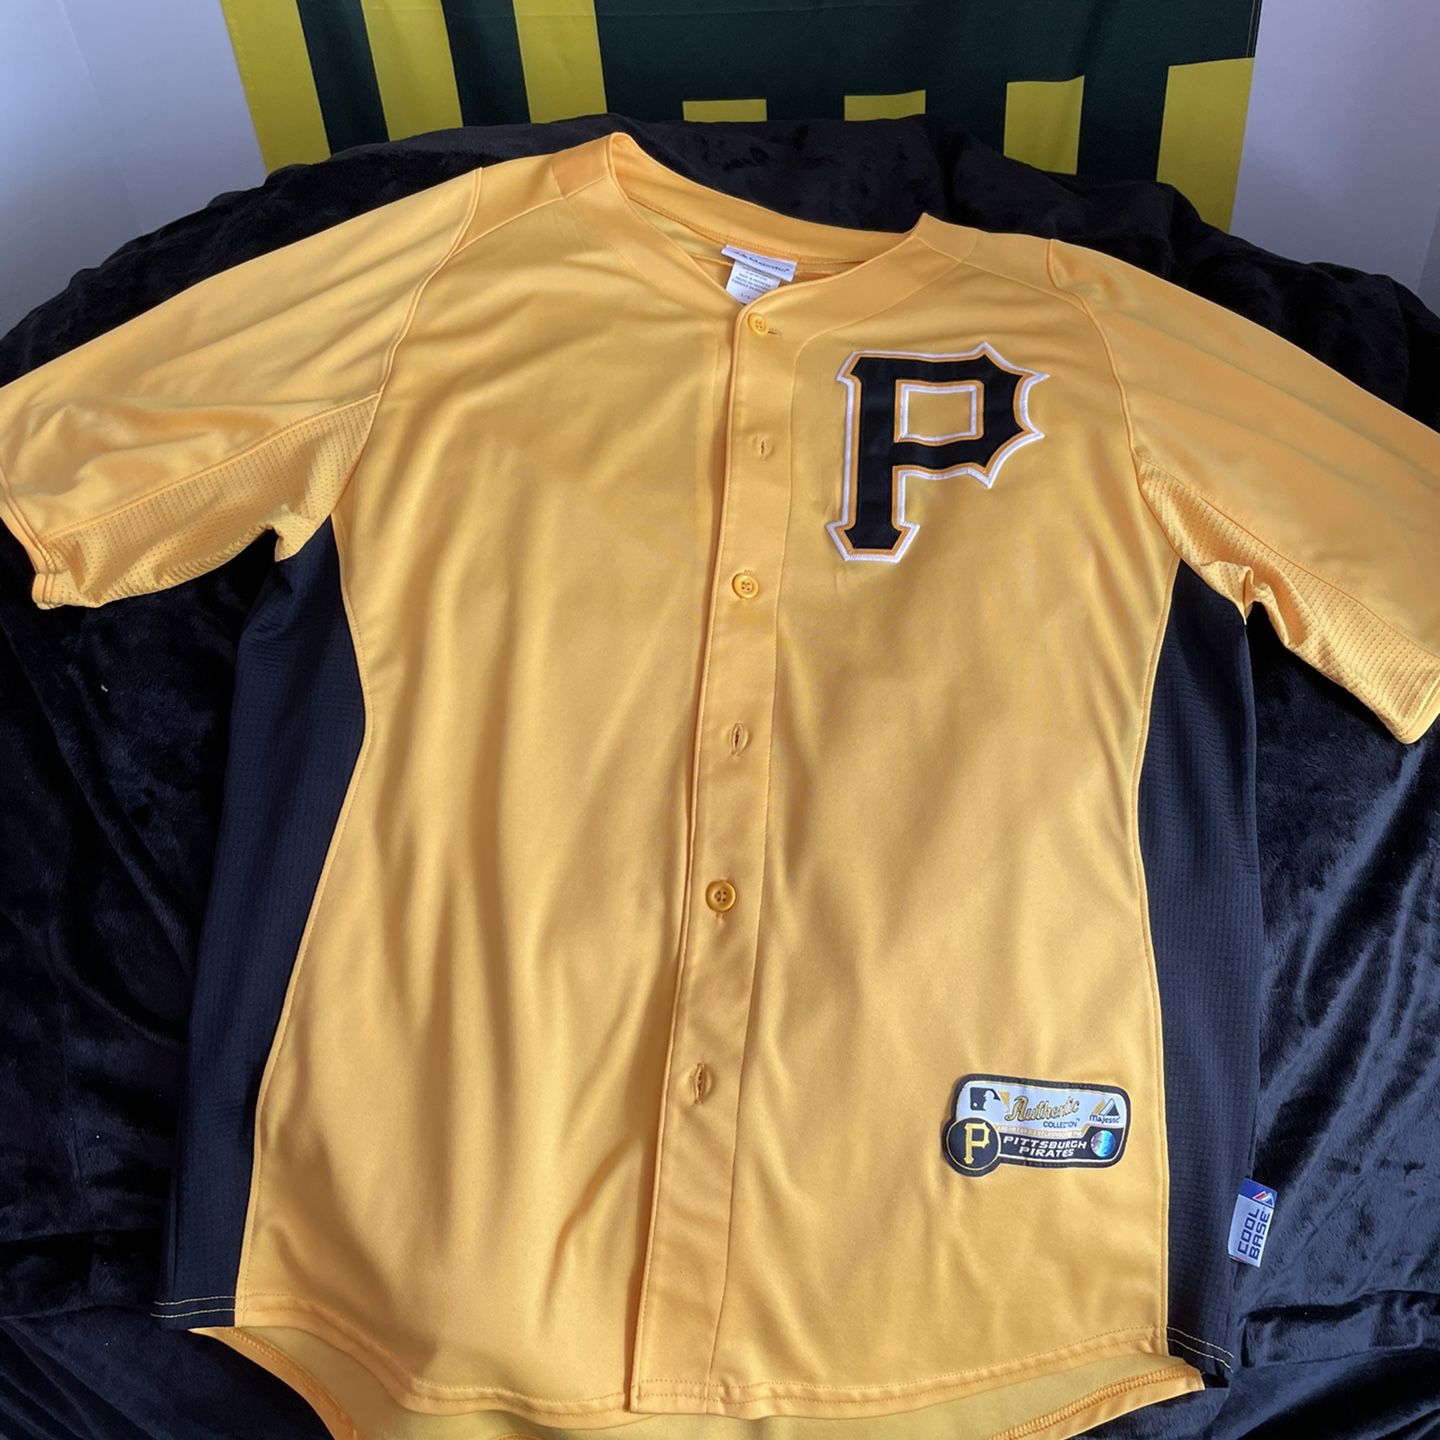 Pittsburgh Pirates Batting Practice Jersey for Sale in Ravenna, OH